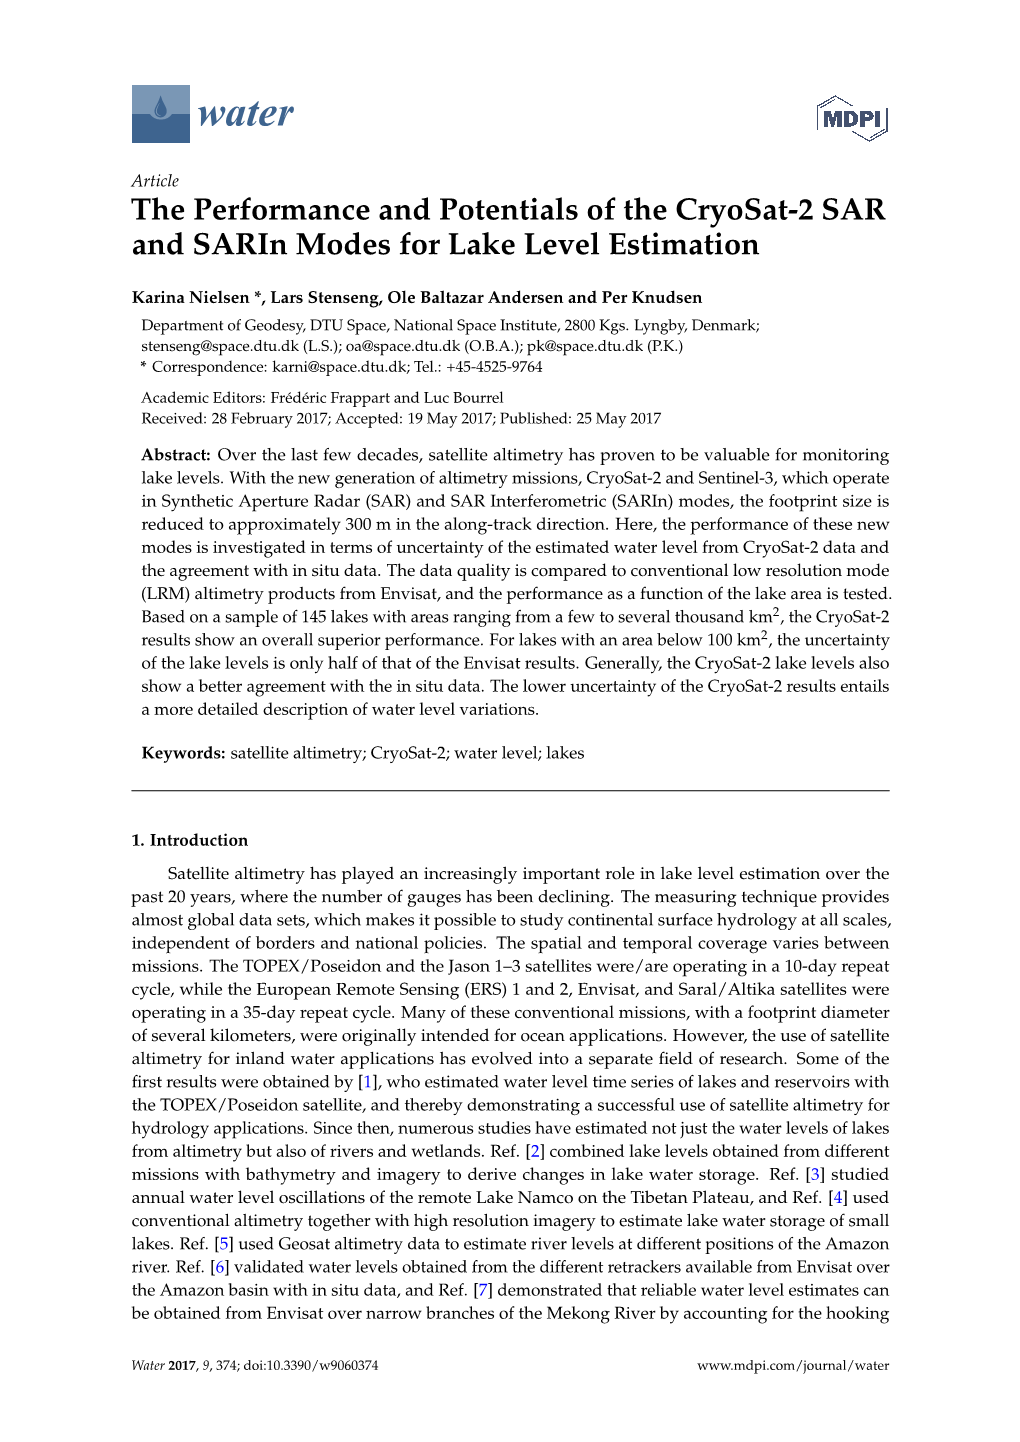 The Performance and Potentials of the Cryosat-2 SAR and Sarin Modes for Lake Level Estimation